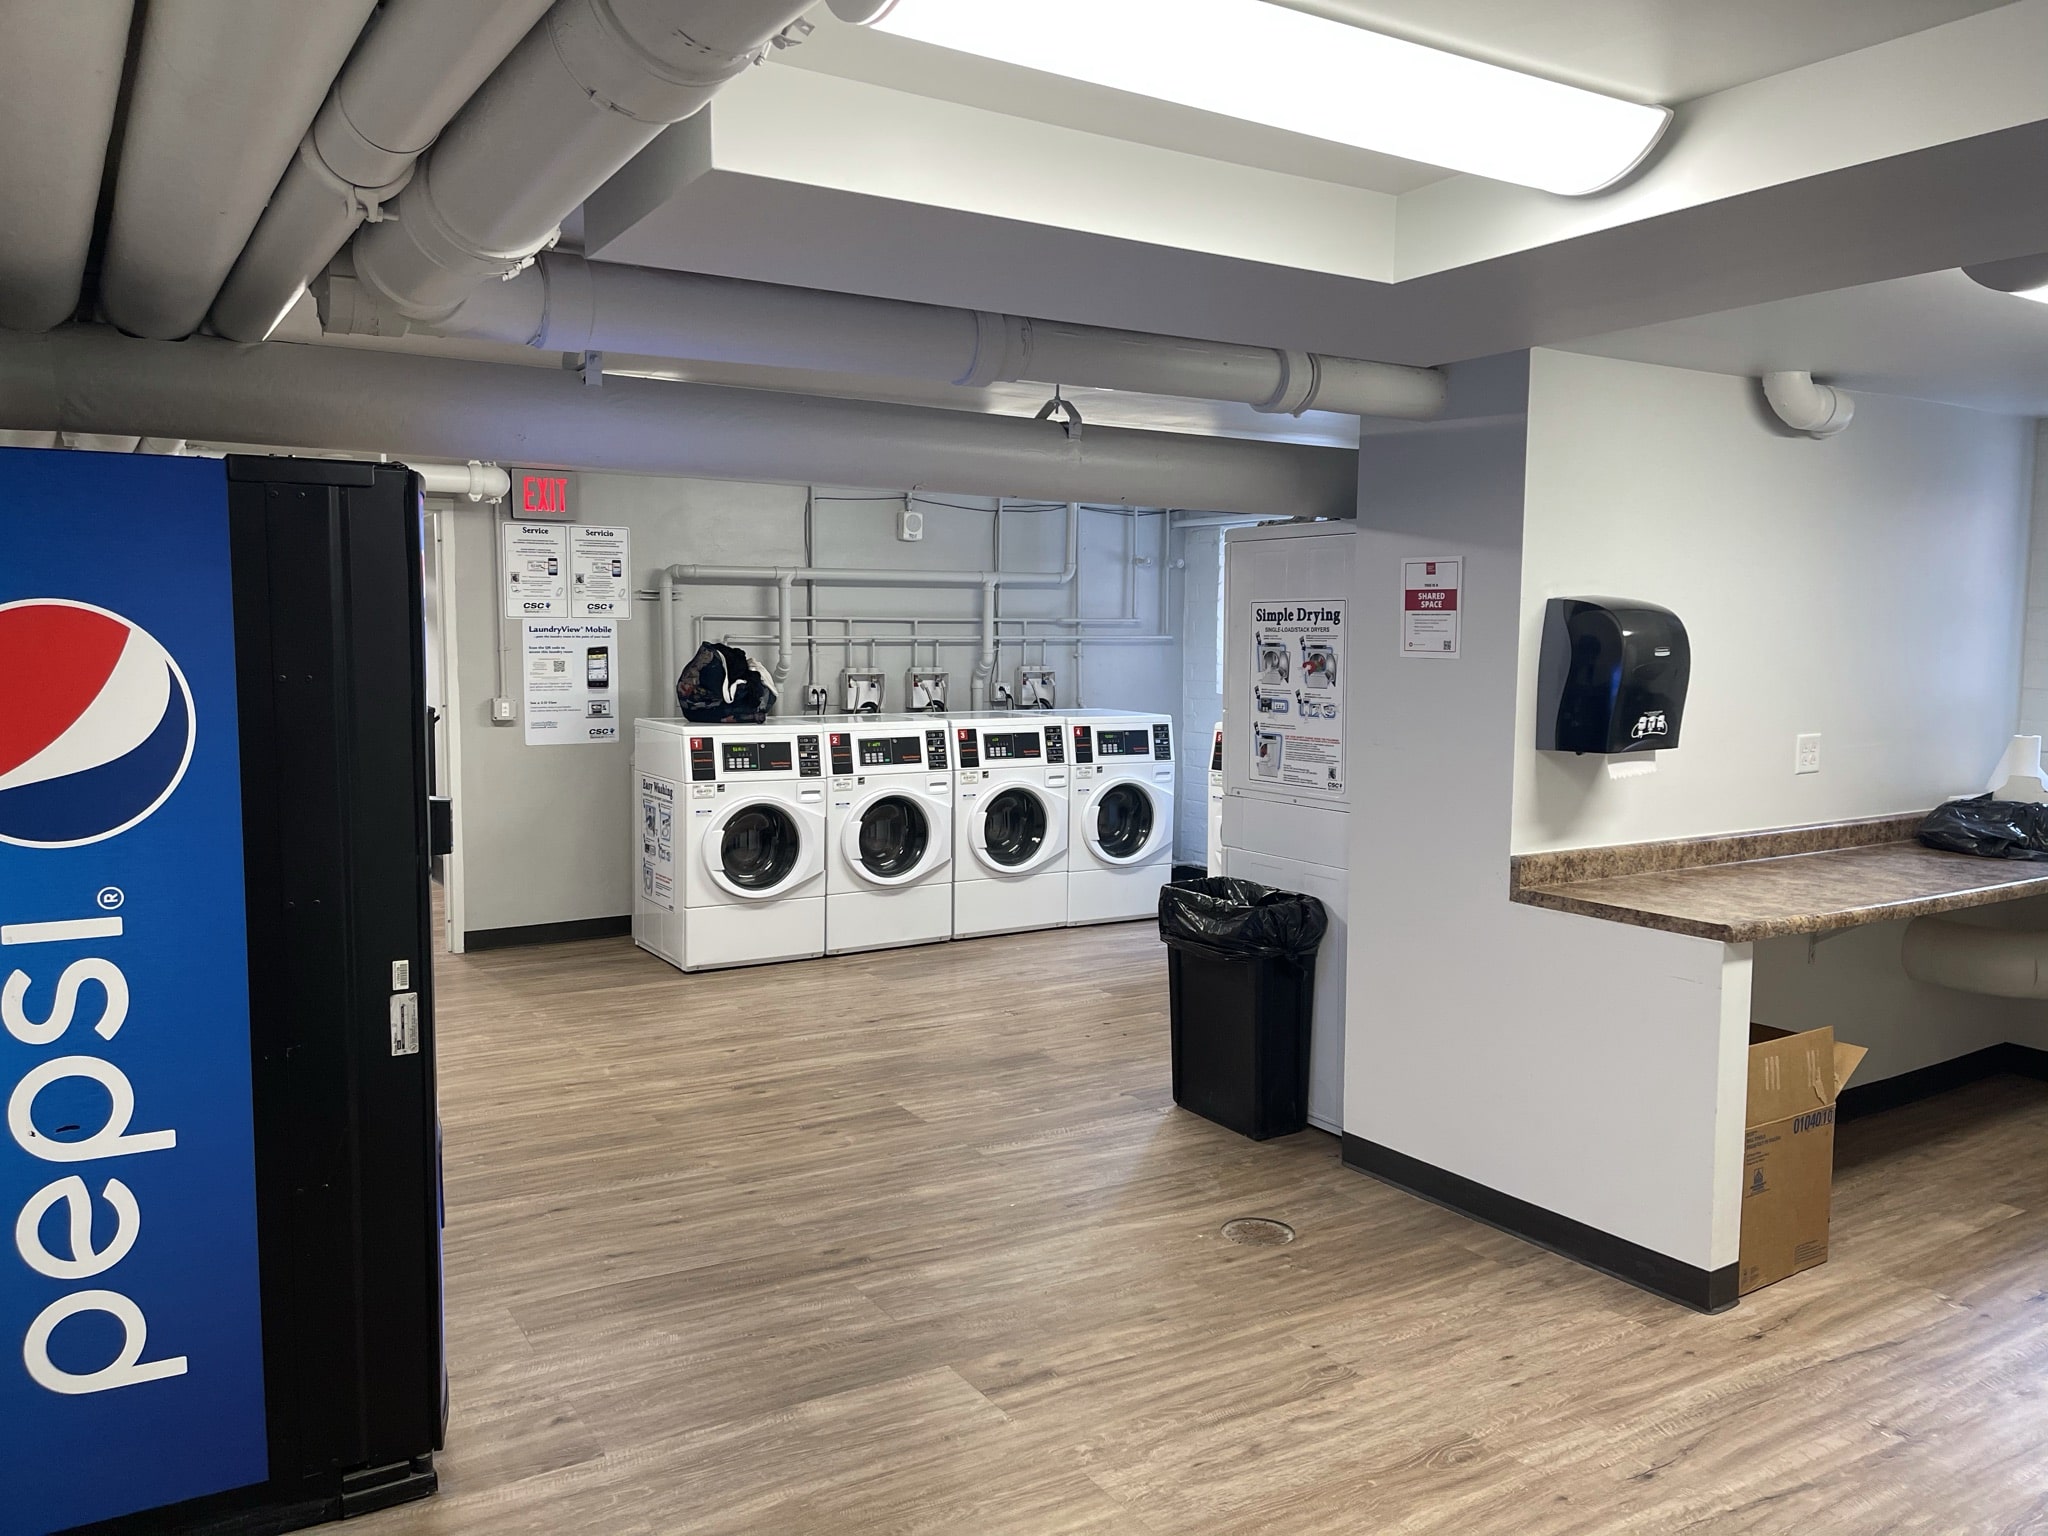 Fifth Neville Apartment Laundry - washers, dryer, folding area and vending machine